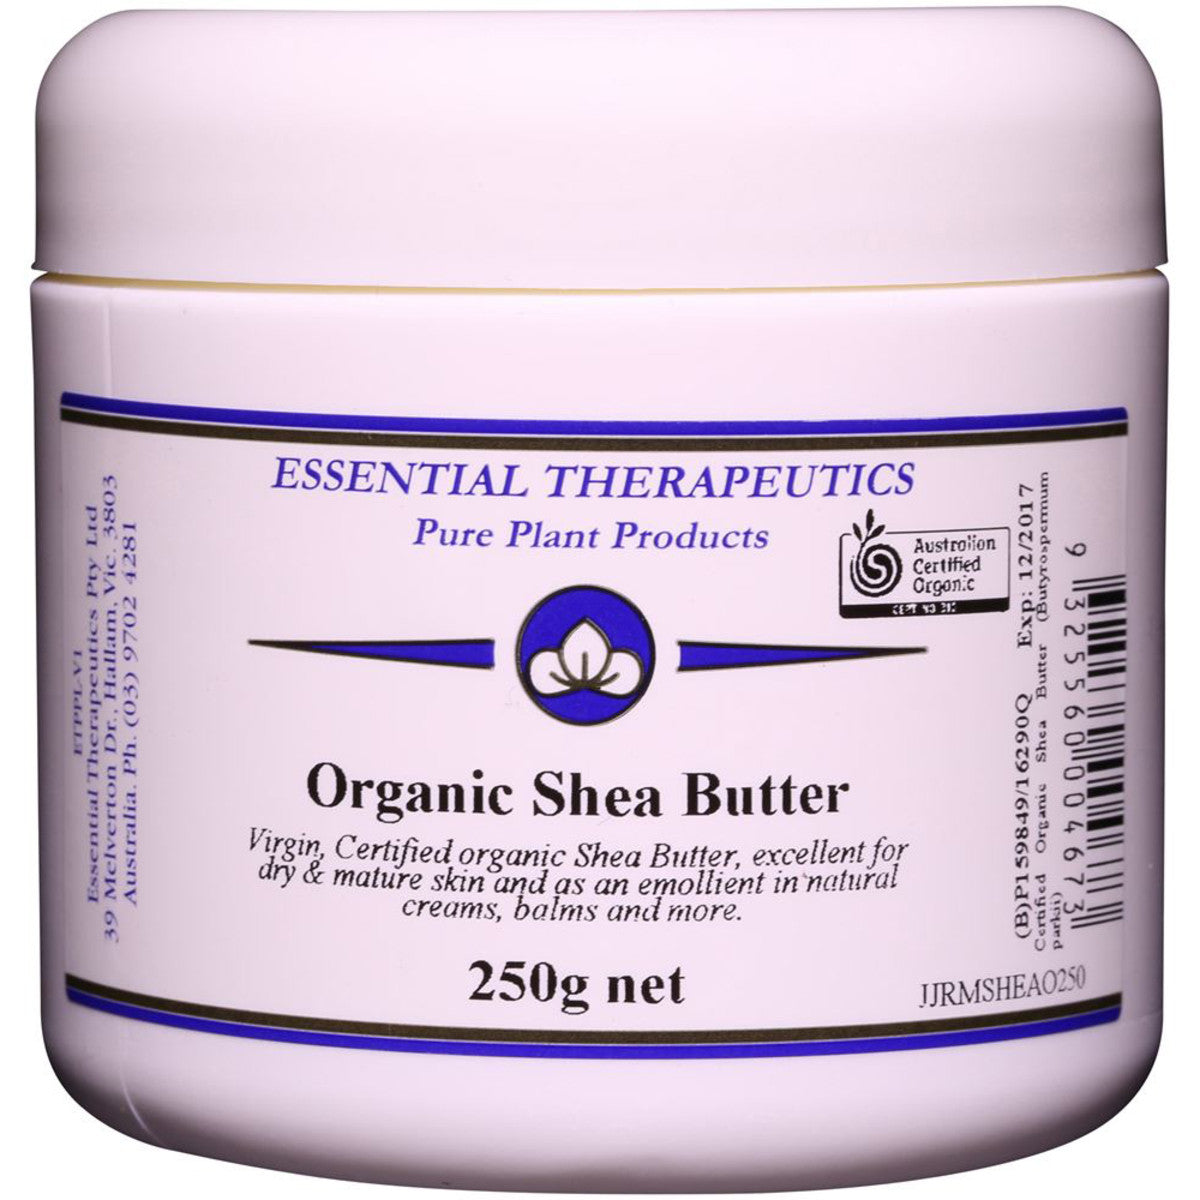 Essential Therapeutic - Shea Butter Organic 250g